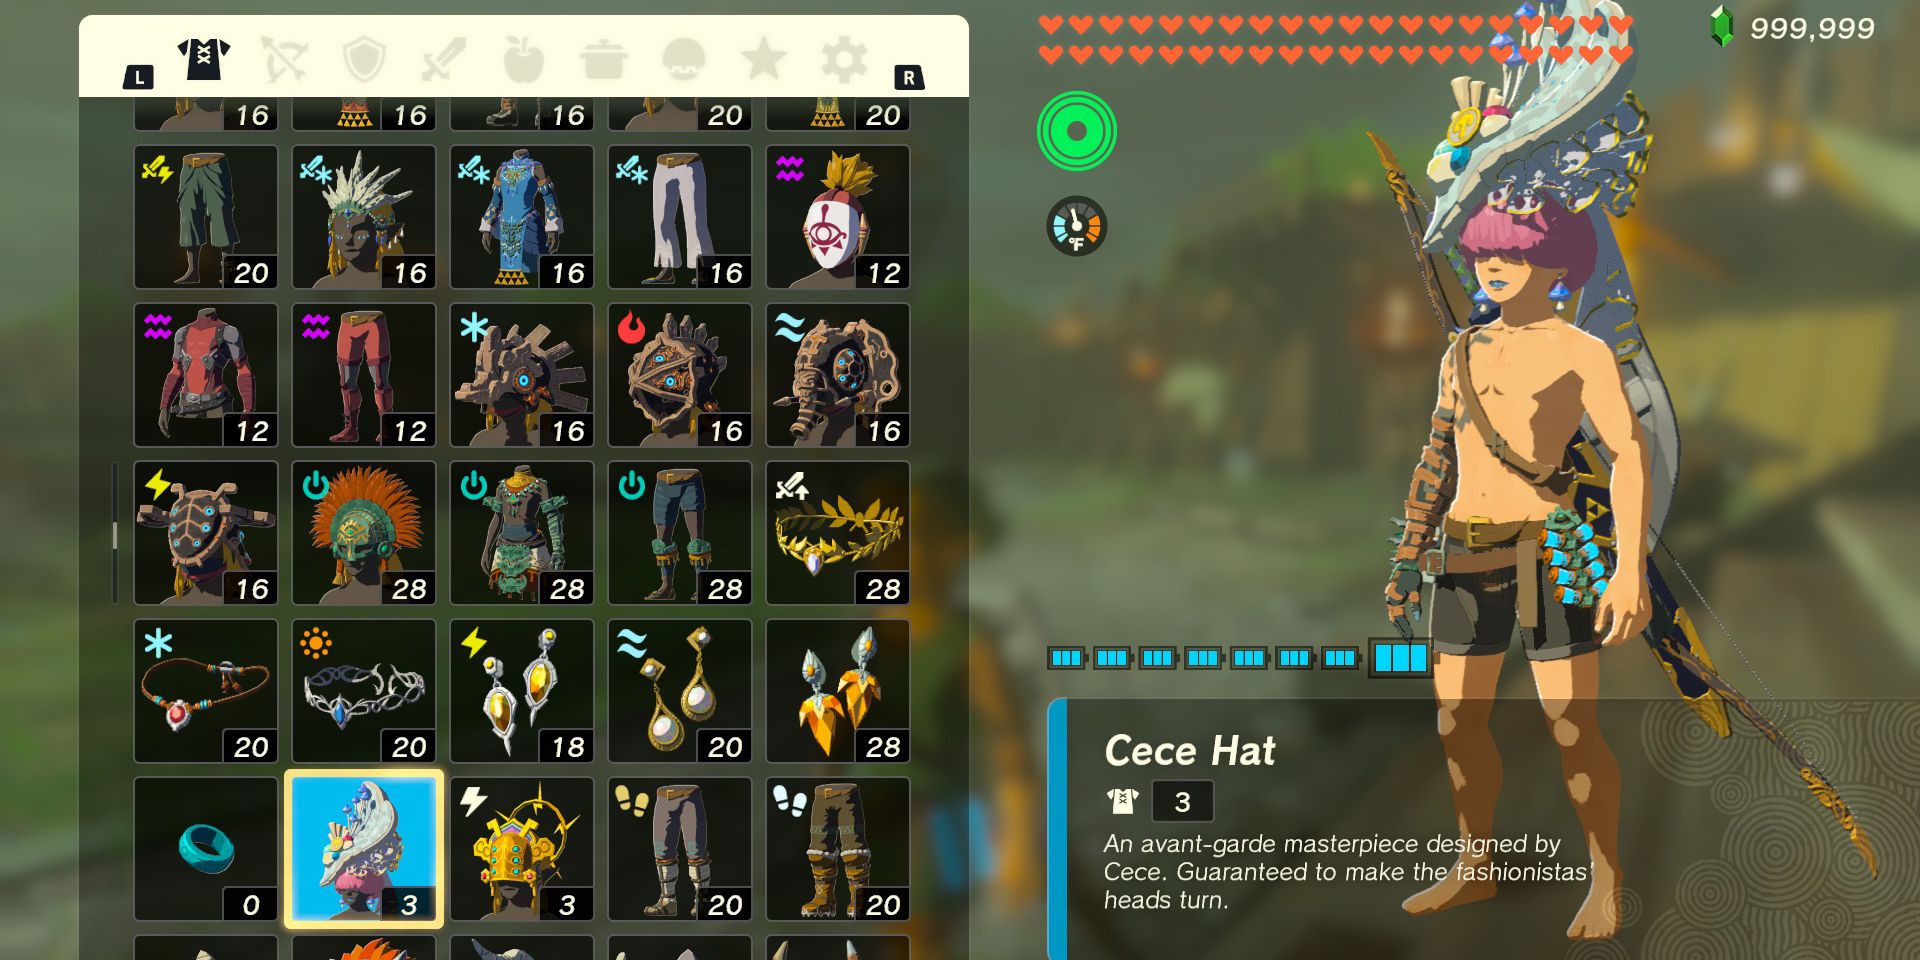 The Cece Hat armor piece in The Legend of Zelda: Tears of the Kingdom